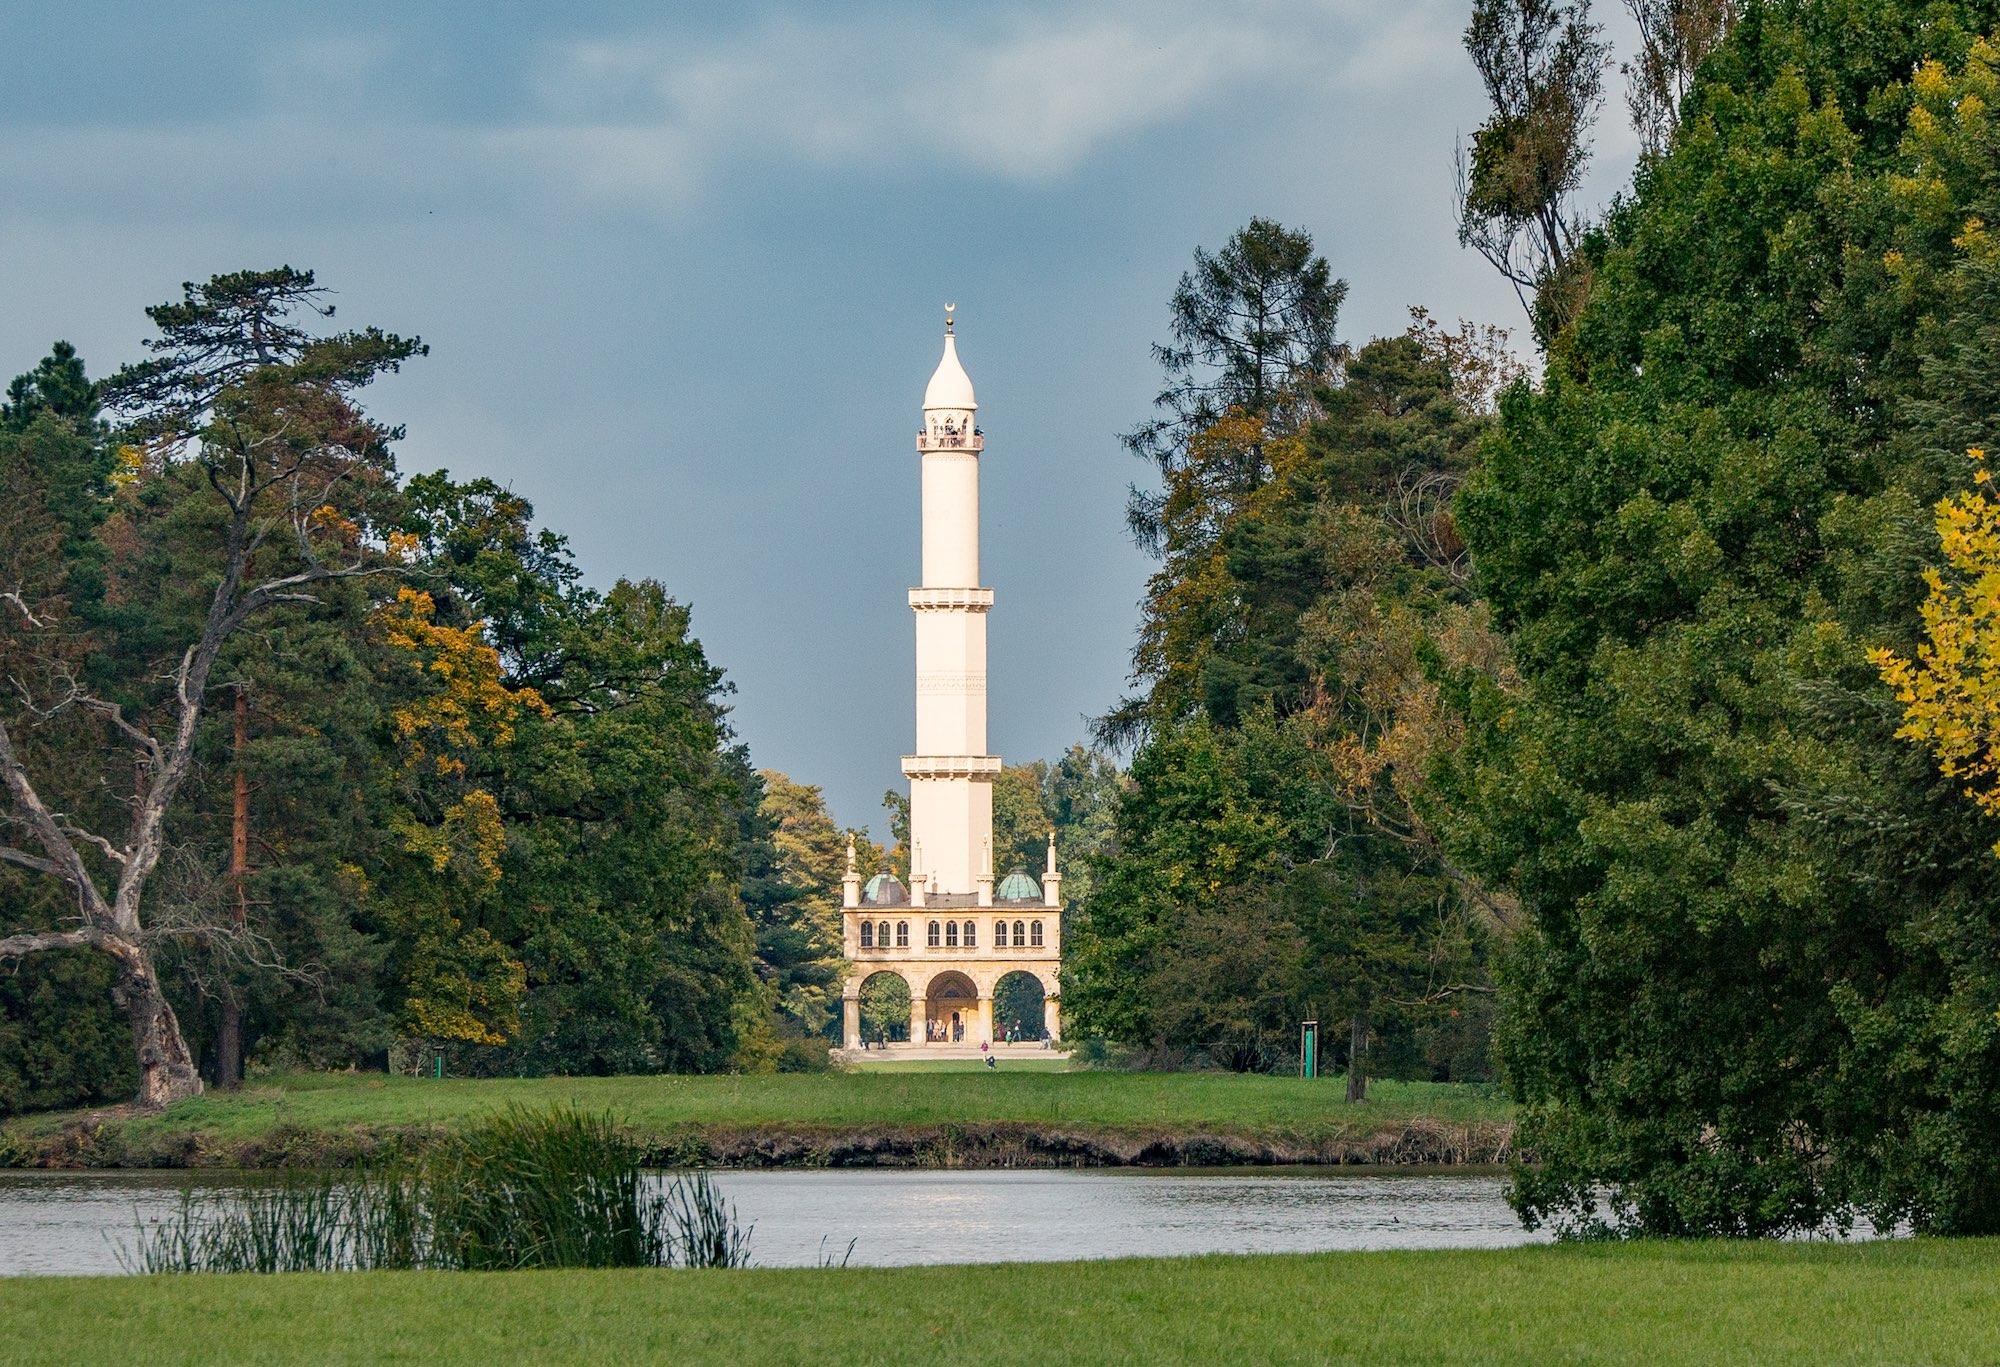 One of the most significant works of garden art in the world connects a natural park with manicured landscapes. In the north part of the park, you can find the oldest romantic construction built between 1797-1802 in Moorish style. The minaret is 60-metres high and has been used as a watchtower. – © Tomas Mehes / Shutterstock